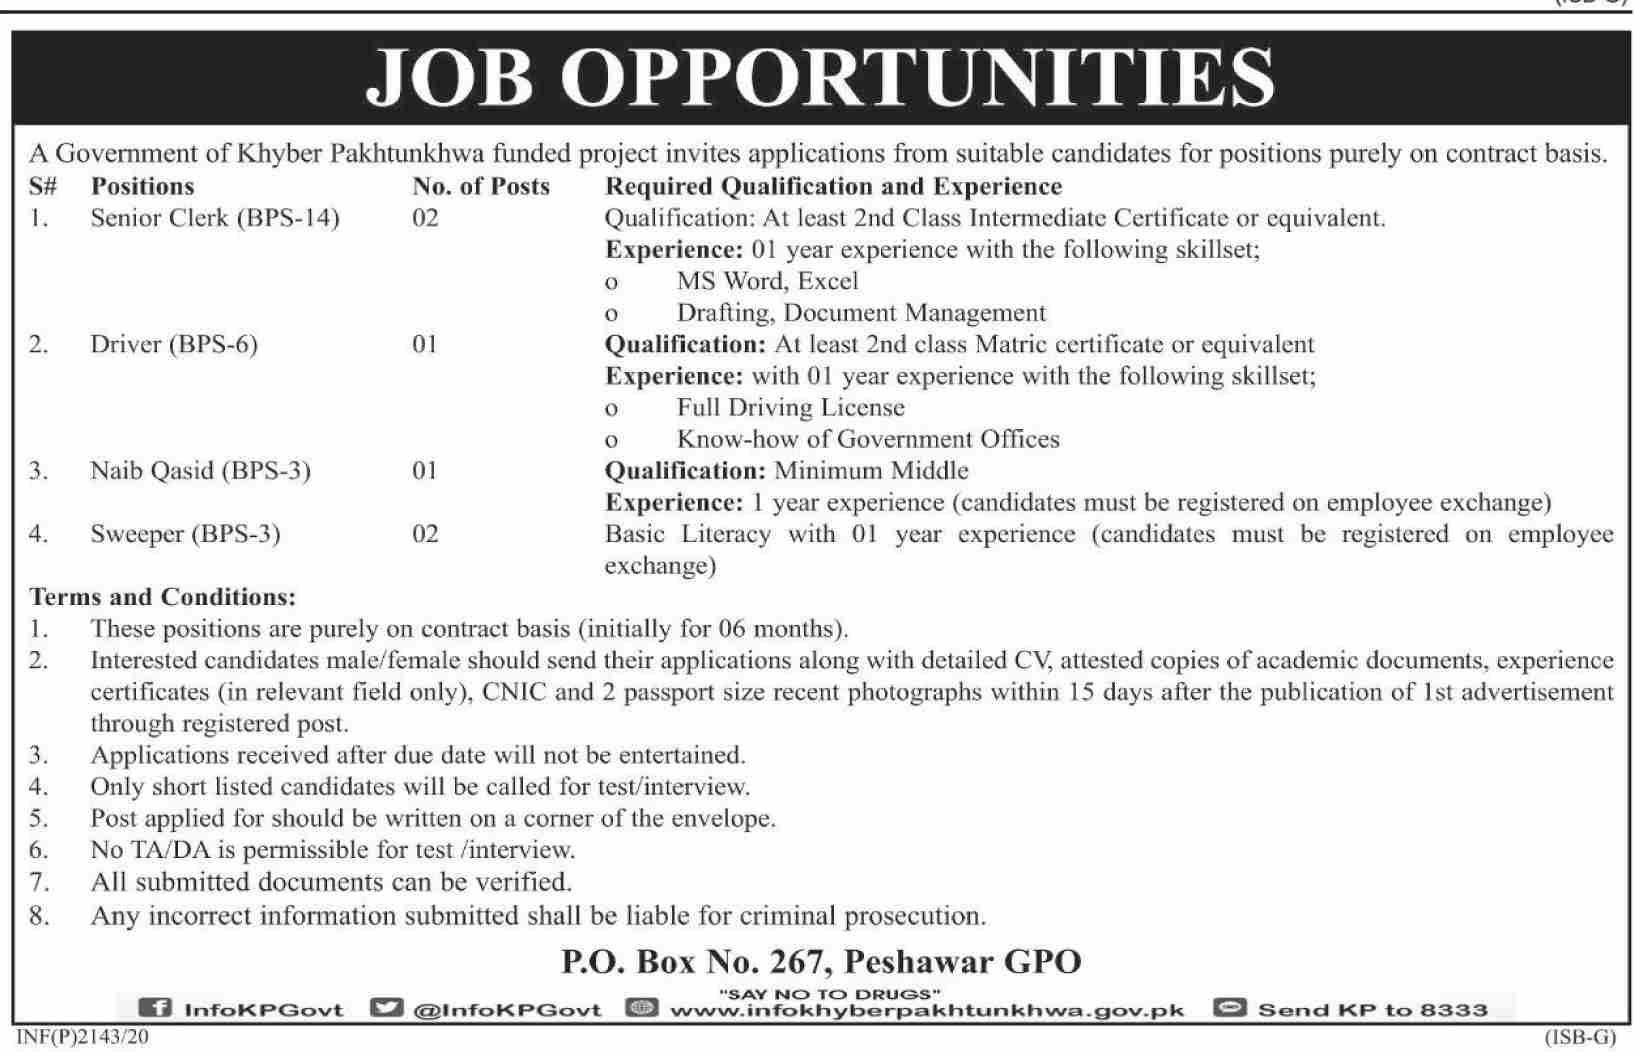 Govt of Khyber Pakhtunkhwa Funded Project 20 June 2020 Jobs